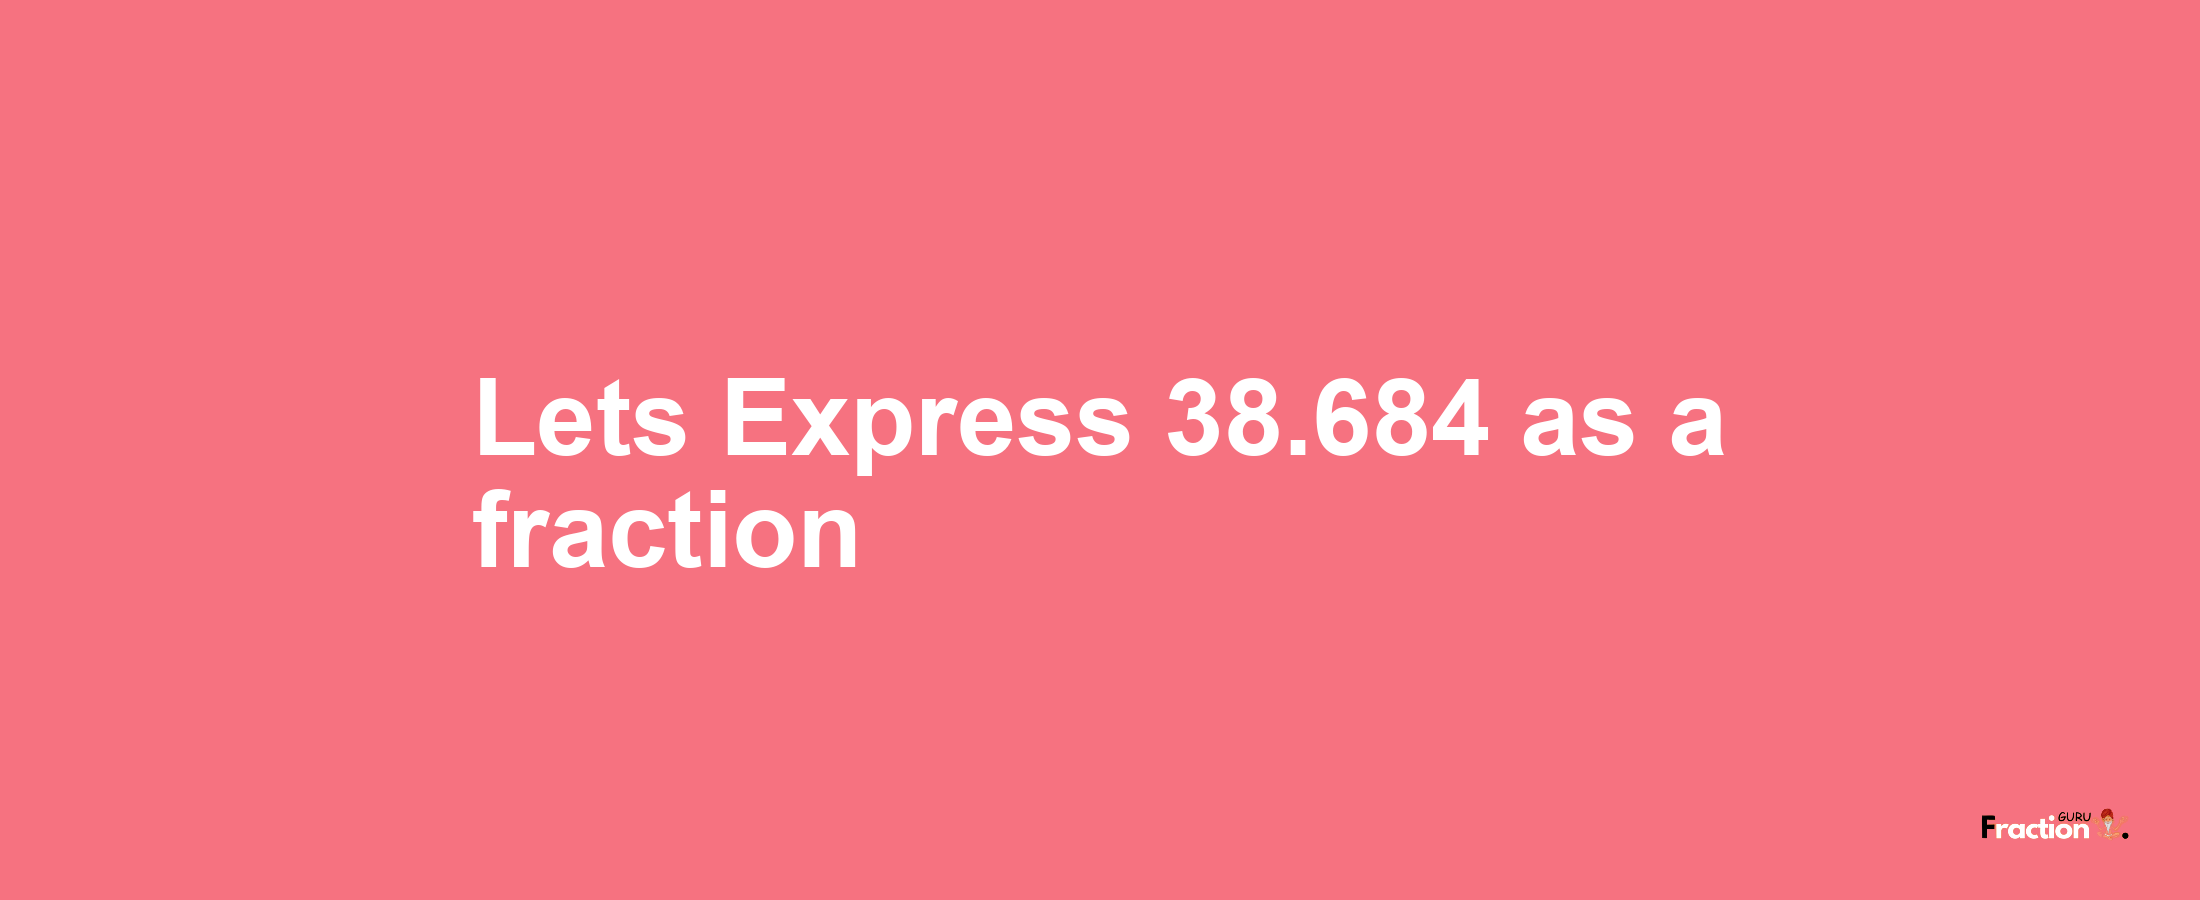 Lets Express 38.684 as afraction